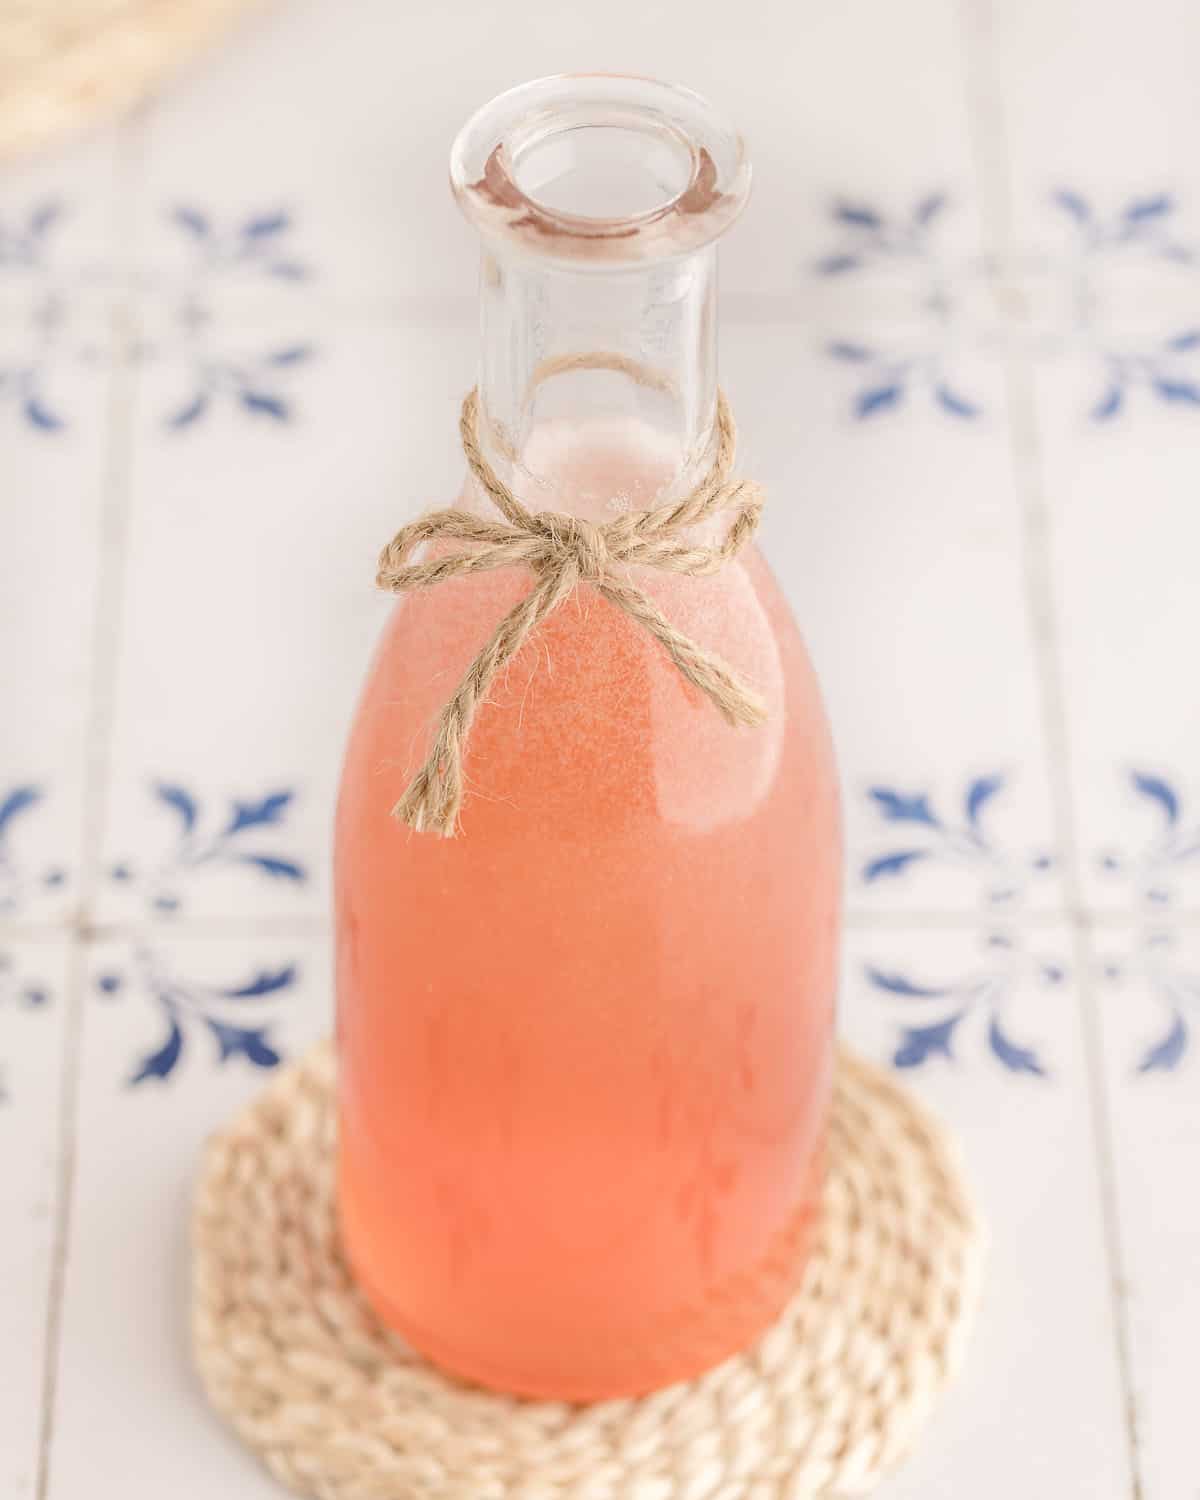 Rhubarb syrup that is pink in a glass bottle with a twine bow tied to it, on a small woven trivet on a white counter surface with blue designs on it. 